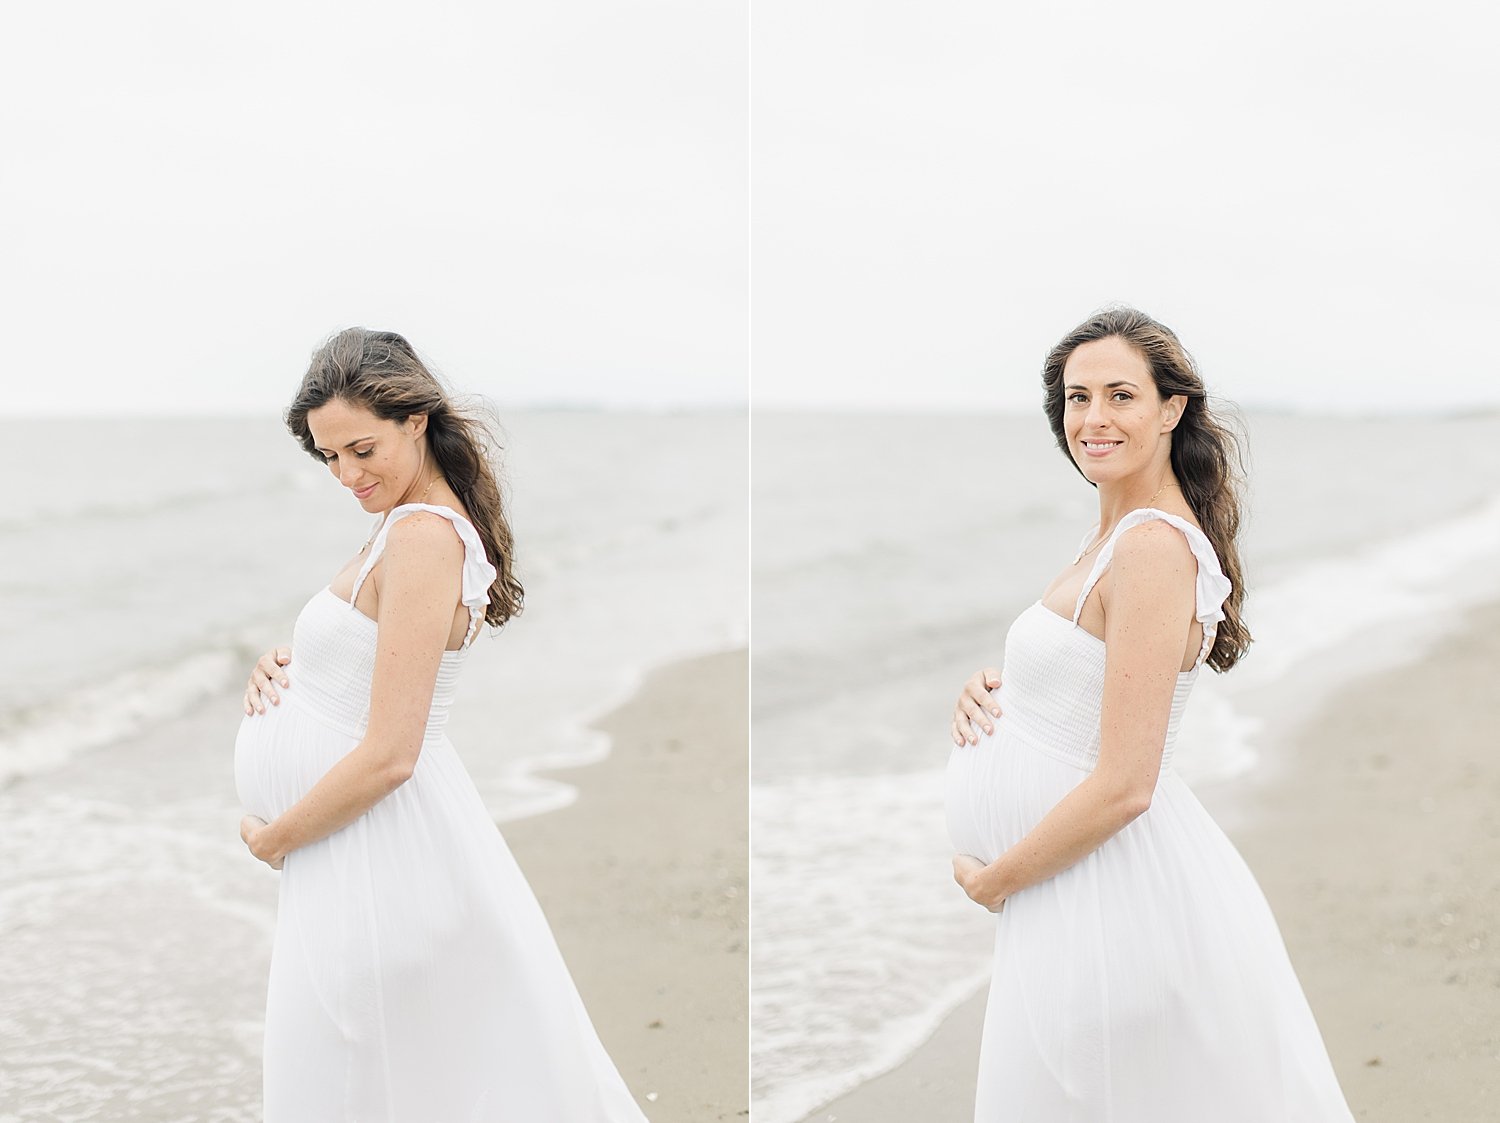 Maternity photos on the beach at Sherwood Island. Photo by Kristin Wood Photography.